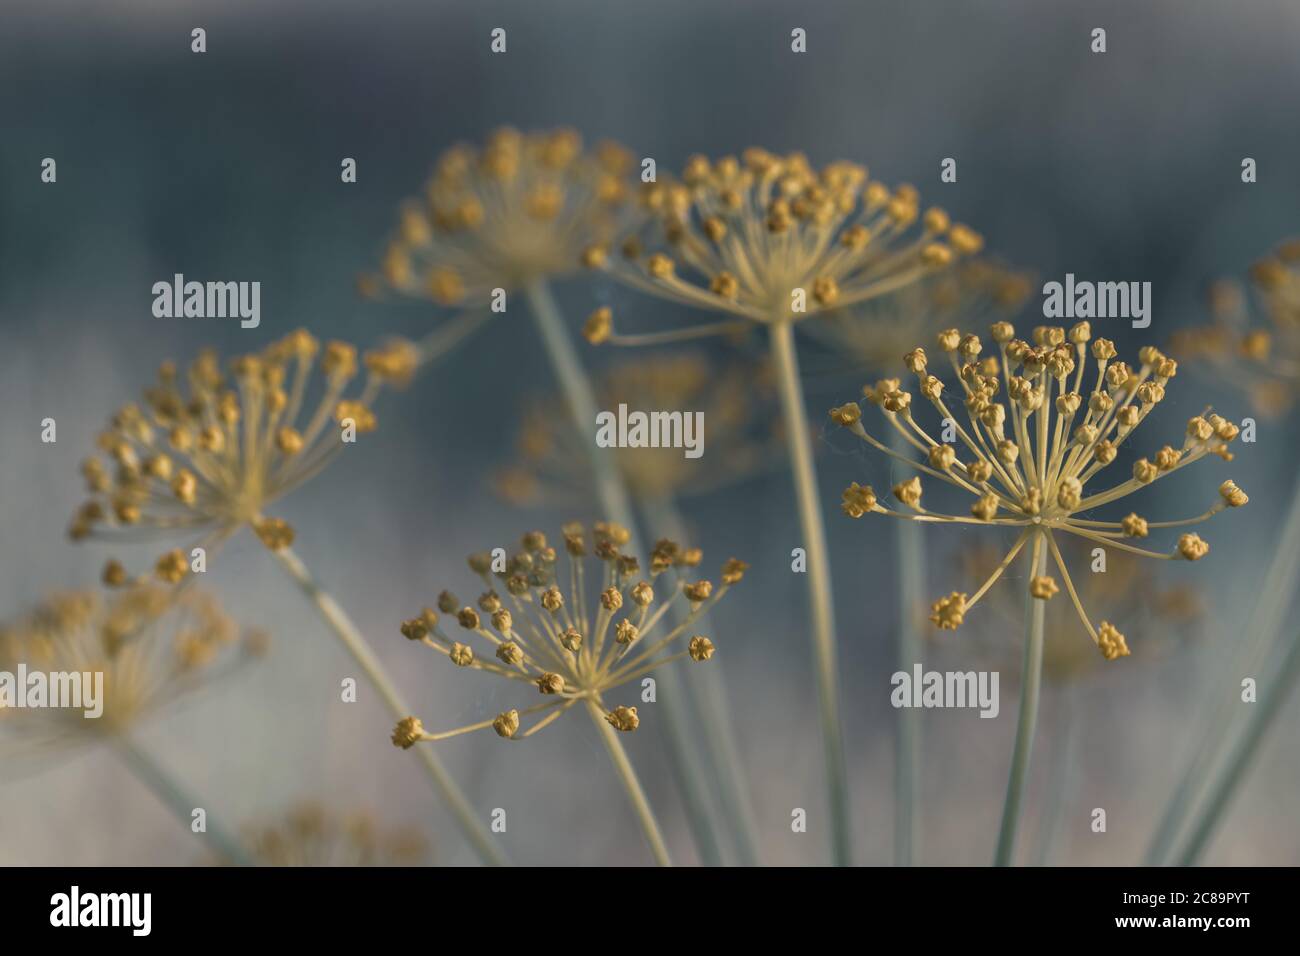 Detail of umbels of fennel (foeniculum vulgare) in the field Stock Photo